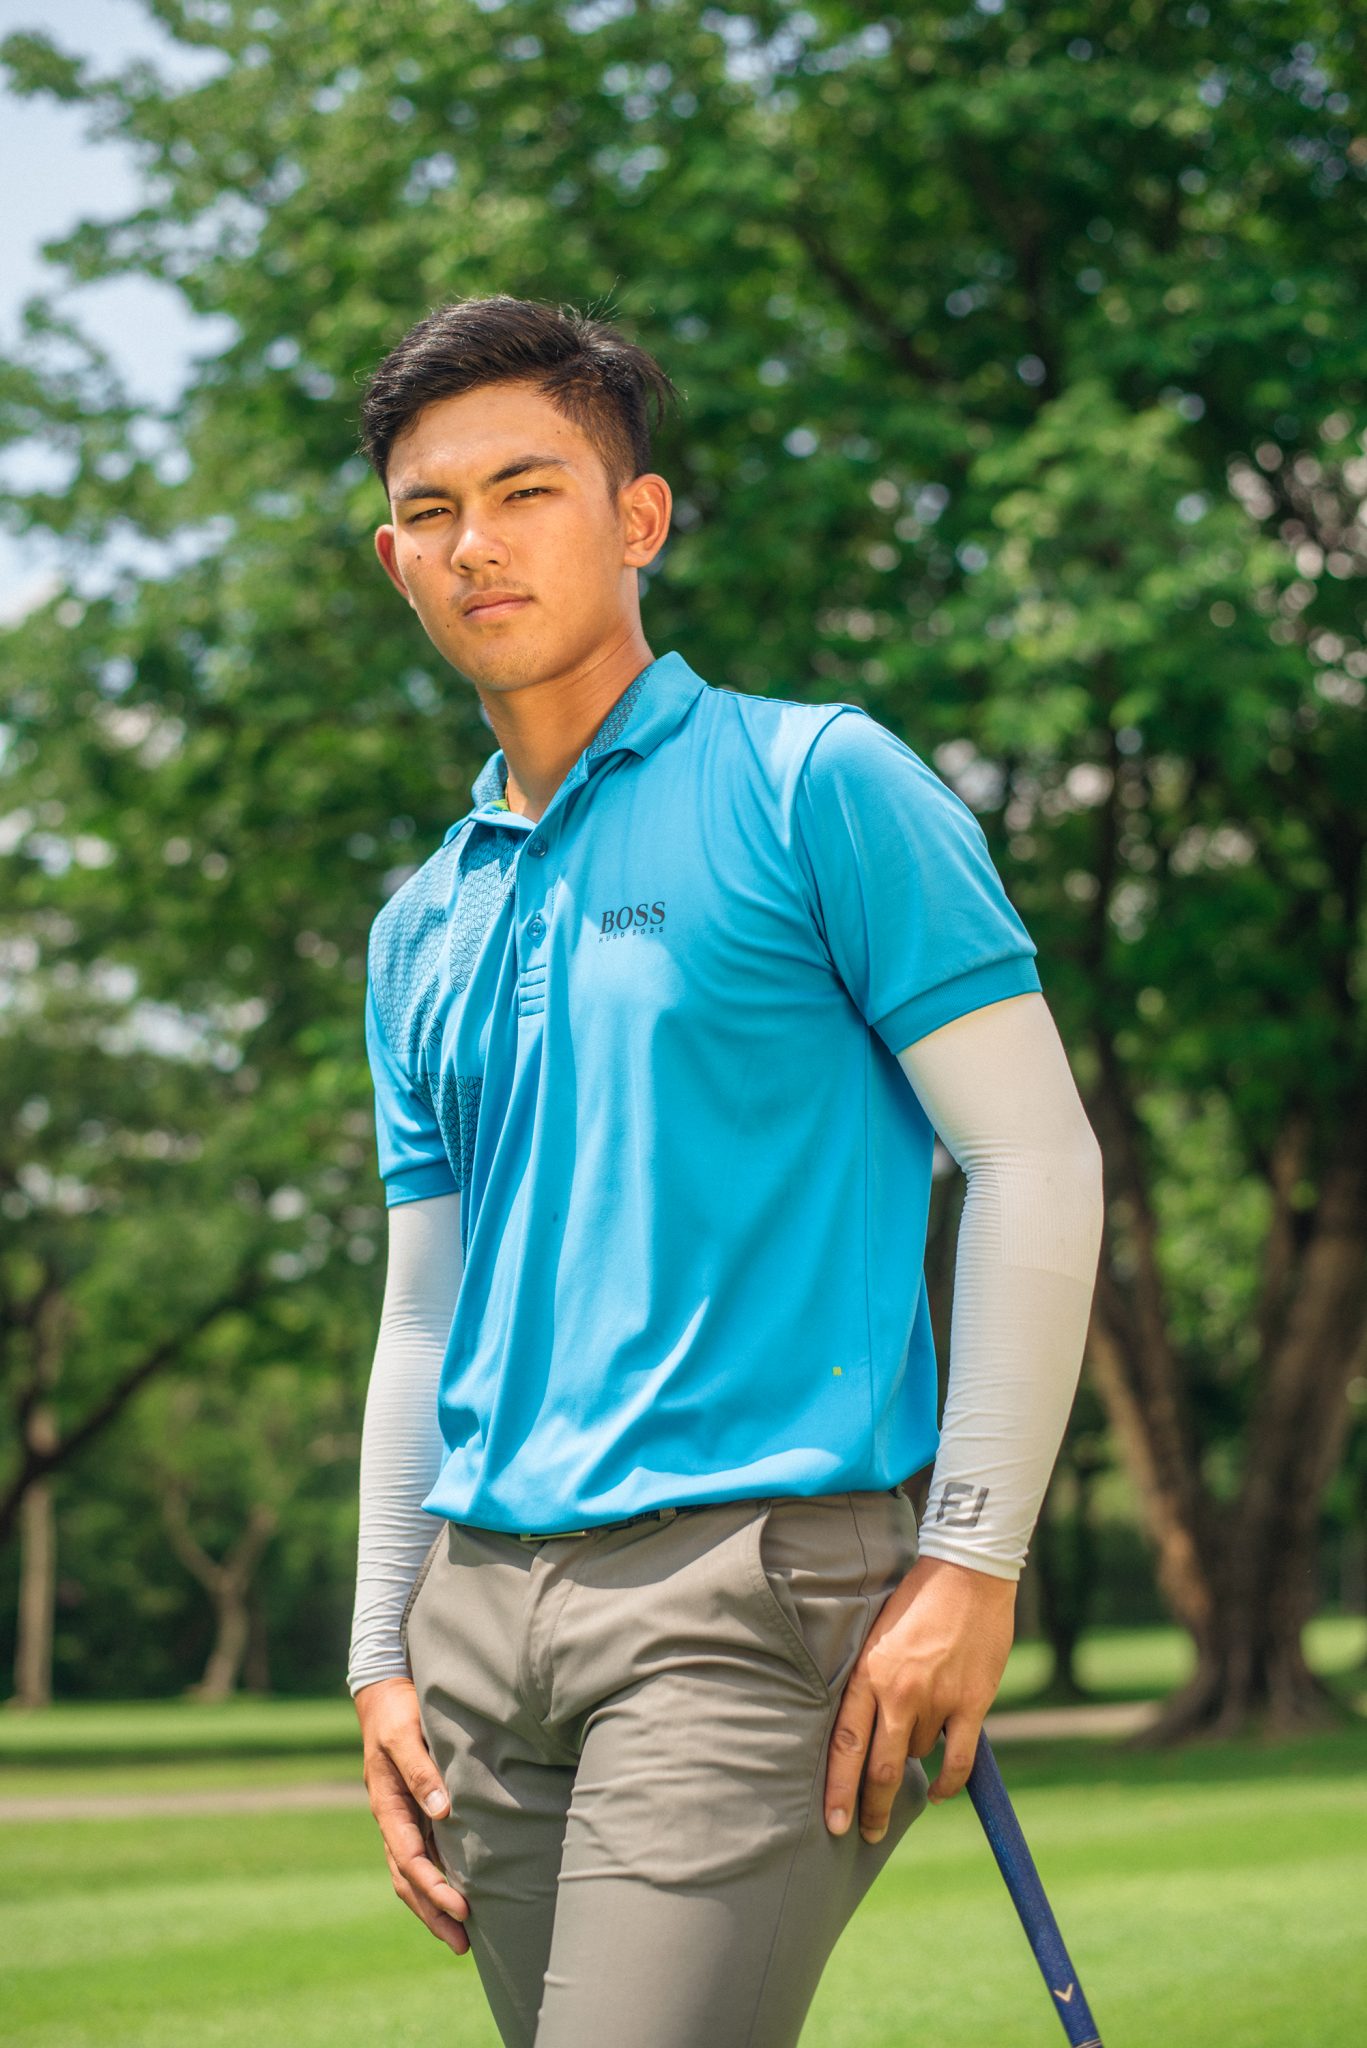 Aidric Chan's recent success is an opportunity for Filipinos to realize that there can also be success in other sports